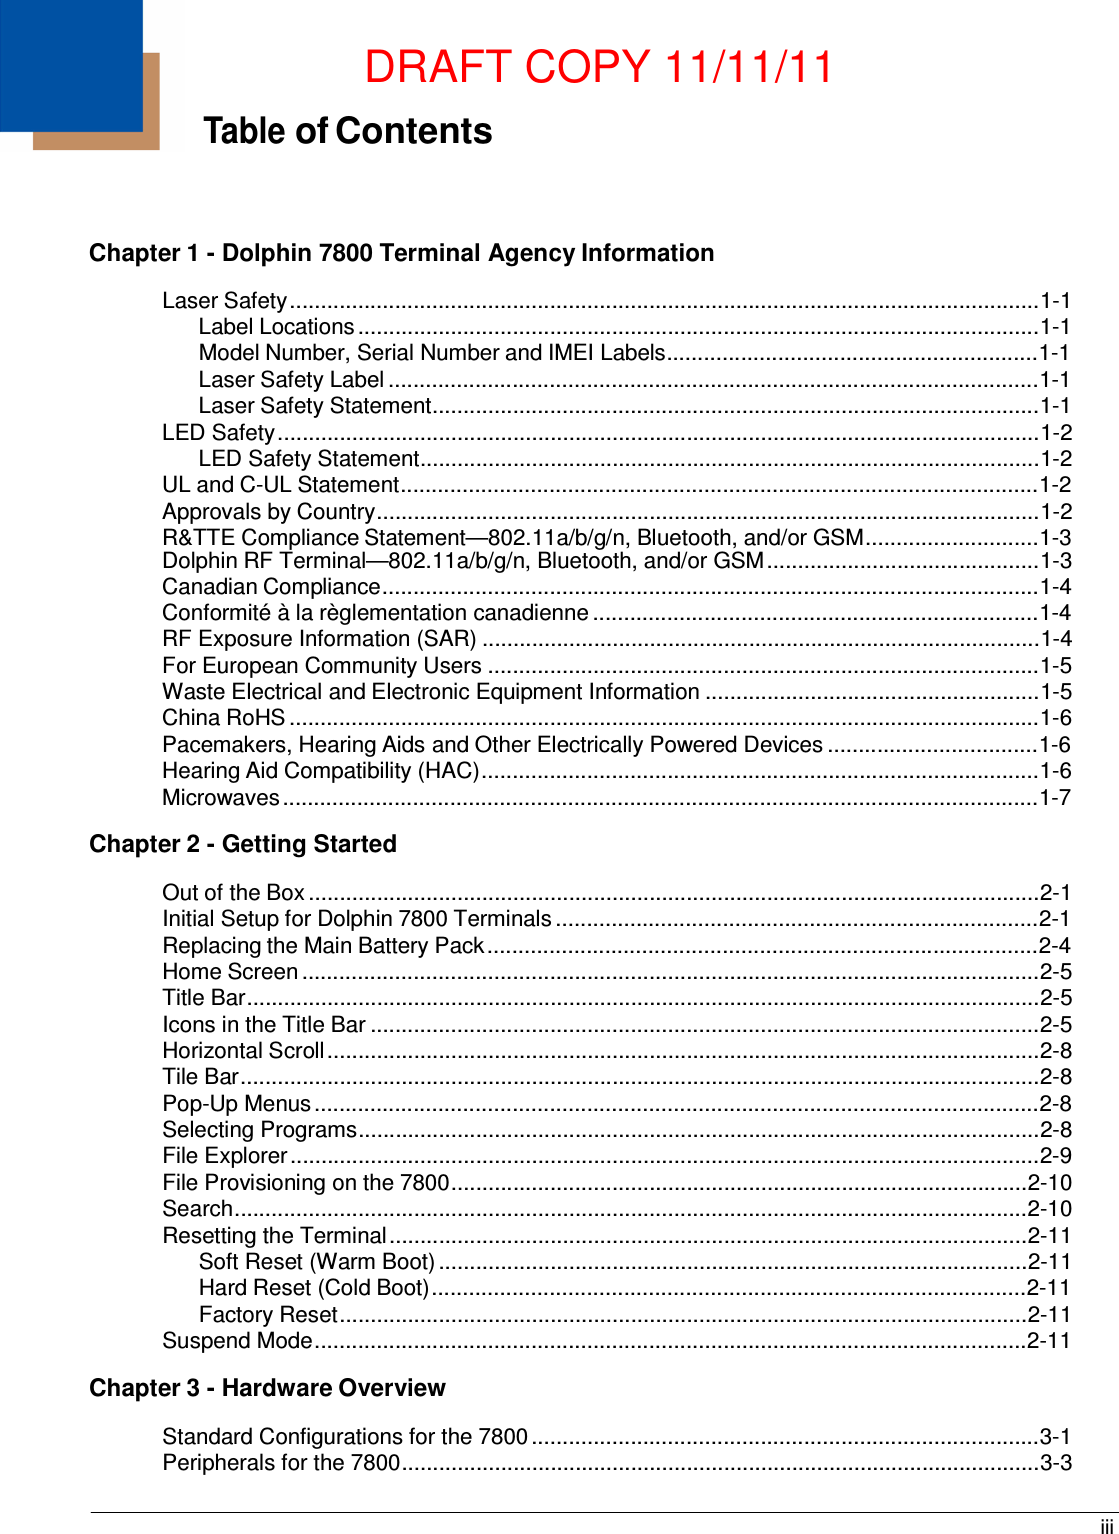 DRAFT COPY 11/11/11 iii   Table of Contents     Chapter 1 - Dolphin 7800 Terminal Agency Information  Laser Safety .........................................................................................................................1-1 Label Locations ..............................................................................................................1-1 Model Number, Serial Number and IMEI Labels............................................................1-1 Laser Safety Label .........................................................................................................1-1 Laser Safety Statement..................................................................................................1-1 LED Safety ...........................................................................................................................1-2 LED Safety Statement....................................................................................................1-2 UL and C-UL Statement.......................................................................................................1-2 Approvals by Country...........................................................................................................1-2 R&amp;TTE Compliance Statement—802.11a/b/g/n, Bluetooth, and/or GSM............................1-3 Dolphin RF Terminal—802.11a/b/g/n, Bluetooth, and/or GSM ............................................1-3 Canadian Compliance..........................................................................................................1-4 Conformité à la règlementation canadienne ........................................................................1-4 RF Exposure Information (SAR) ..........................................................................................1-4 For European Community Users .........................................................................................1-5 Waste Electrical and Electronic Equipment Information ......................................................1-5 China RoHS .........................................................................................................................1-6 Pacemakers, Hearing Aids and Other Electrically Powered Devices ..................................1-6 Hearing Aid Compatibility (HAC)..........................................................................................1-6 Microwaves ..........................................................................................................................1-7  Chapter 2 - Getting Started  Out of the Box ......................................................................................................................2-1 Initial Setup for Dolphin 7800 Terminals ..............................................................................2-1 Replacing the Main Battery Pack .........................................................................................2-4 Home Screen .......................................................................................................................2-5 Title Bar................................................................................................................................2-5 Icons in the Title Bar ............................................................................................................2-5 Horizontal Scroll ...................................................................................................................2-8 Tile Bar.................................................................................................................................2-8 Pop-Up Menus .....................................................................................................................2-8 Selecting Programs..............................................................................................................2-8 File Explorer .........................................................................................................................2-9 File Provisioning on the 7800.............................................................................................2-10 Search................................................................................................................................2-10 Resetting the Terminal .......................................................................................................2-11 Soft Reset (Warm Boot) ...............................................................................................2-11 Hard Reset (Cold Boot) ................................................................................................2-11 Factory Reset ...............................................................................................................2-11 Suspend Mode ...................................................................................................................2-11  Chapter 3 - Hardware Overview  Standard Configurations for the 7800 ..................................................................................3-1 Peripherals for the 7800.......................................................................................................3-3 